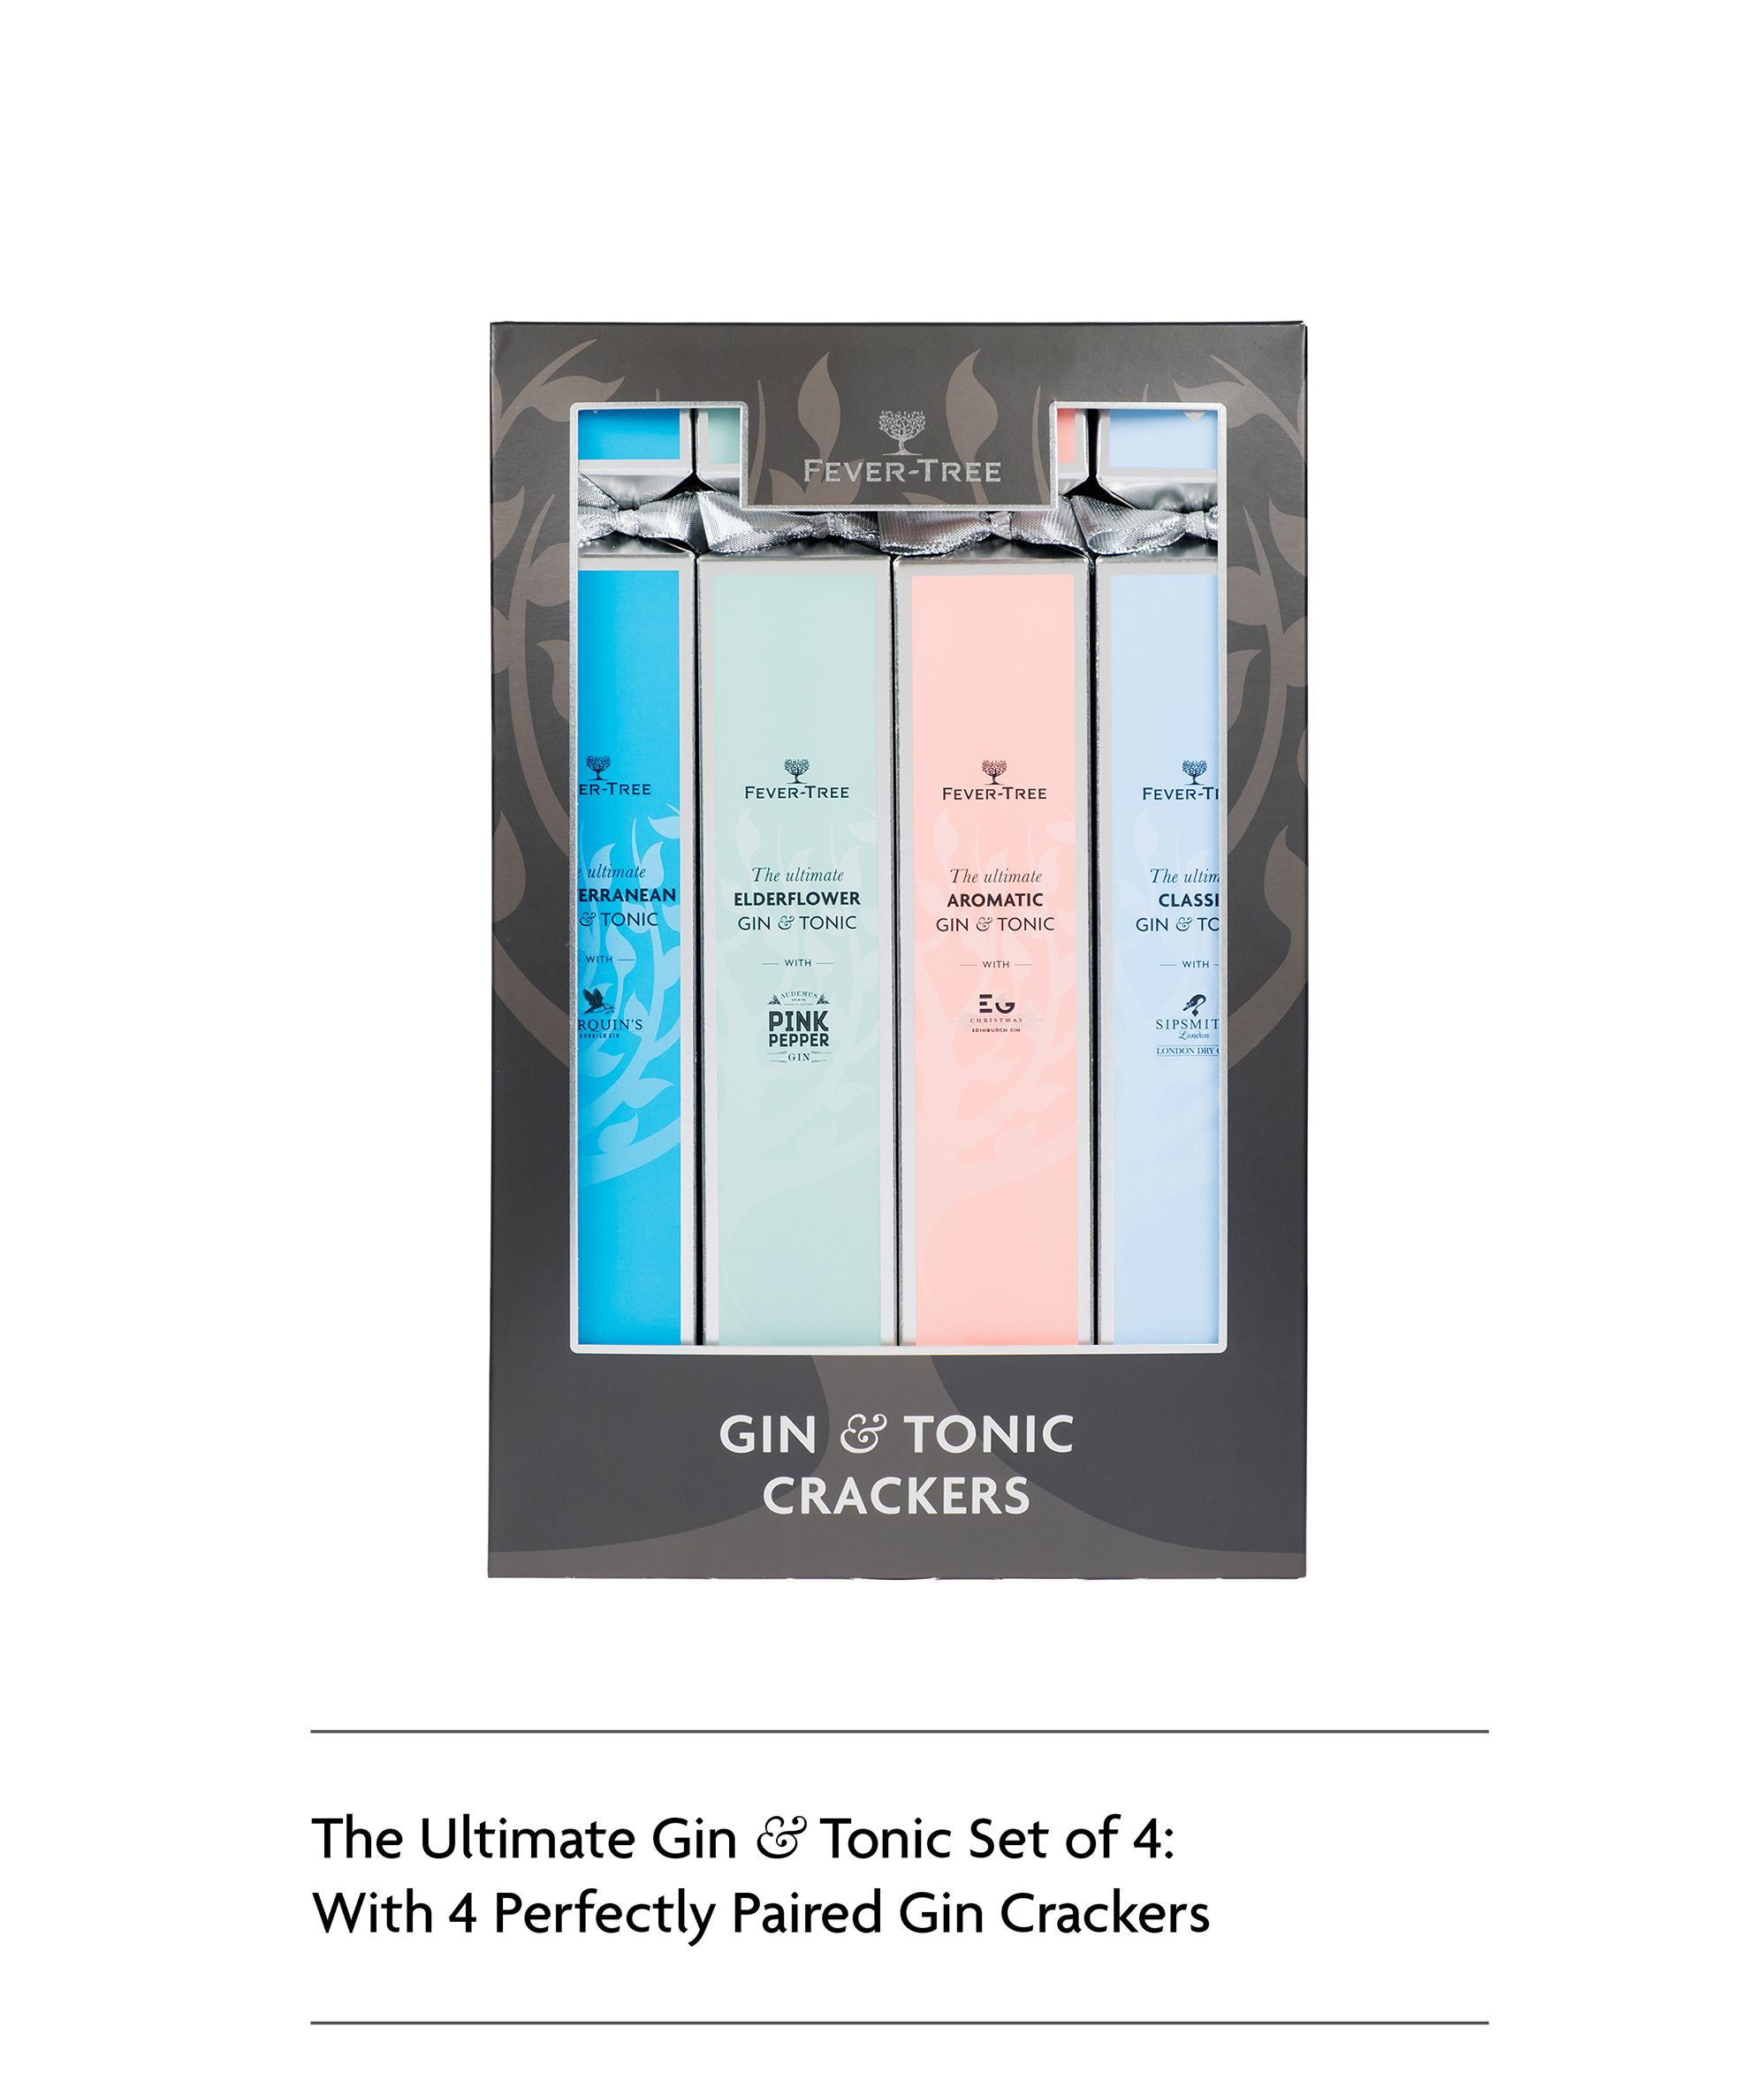 The Ultimate Gin & Tonic Set of 4: With 4 Perfectly Paired Gin Crackers